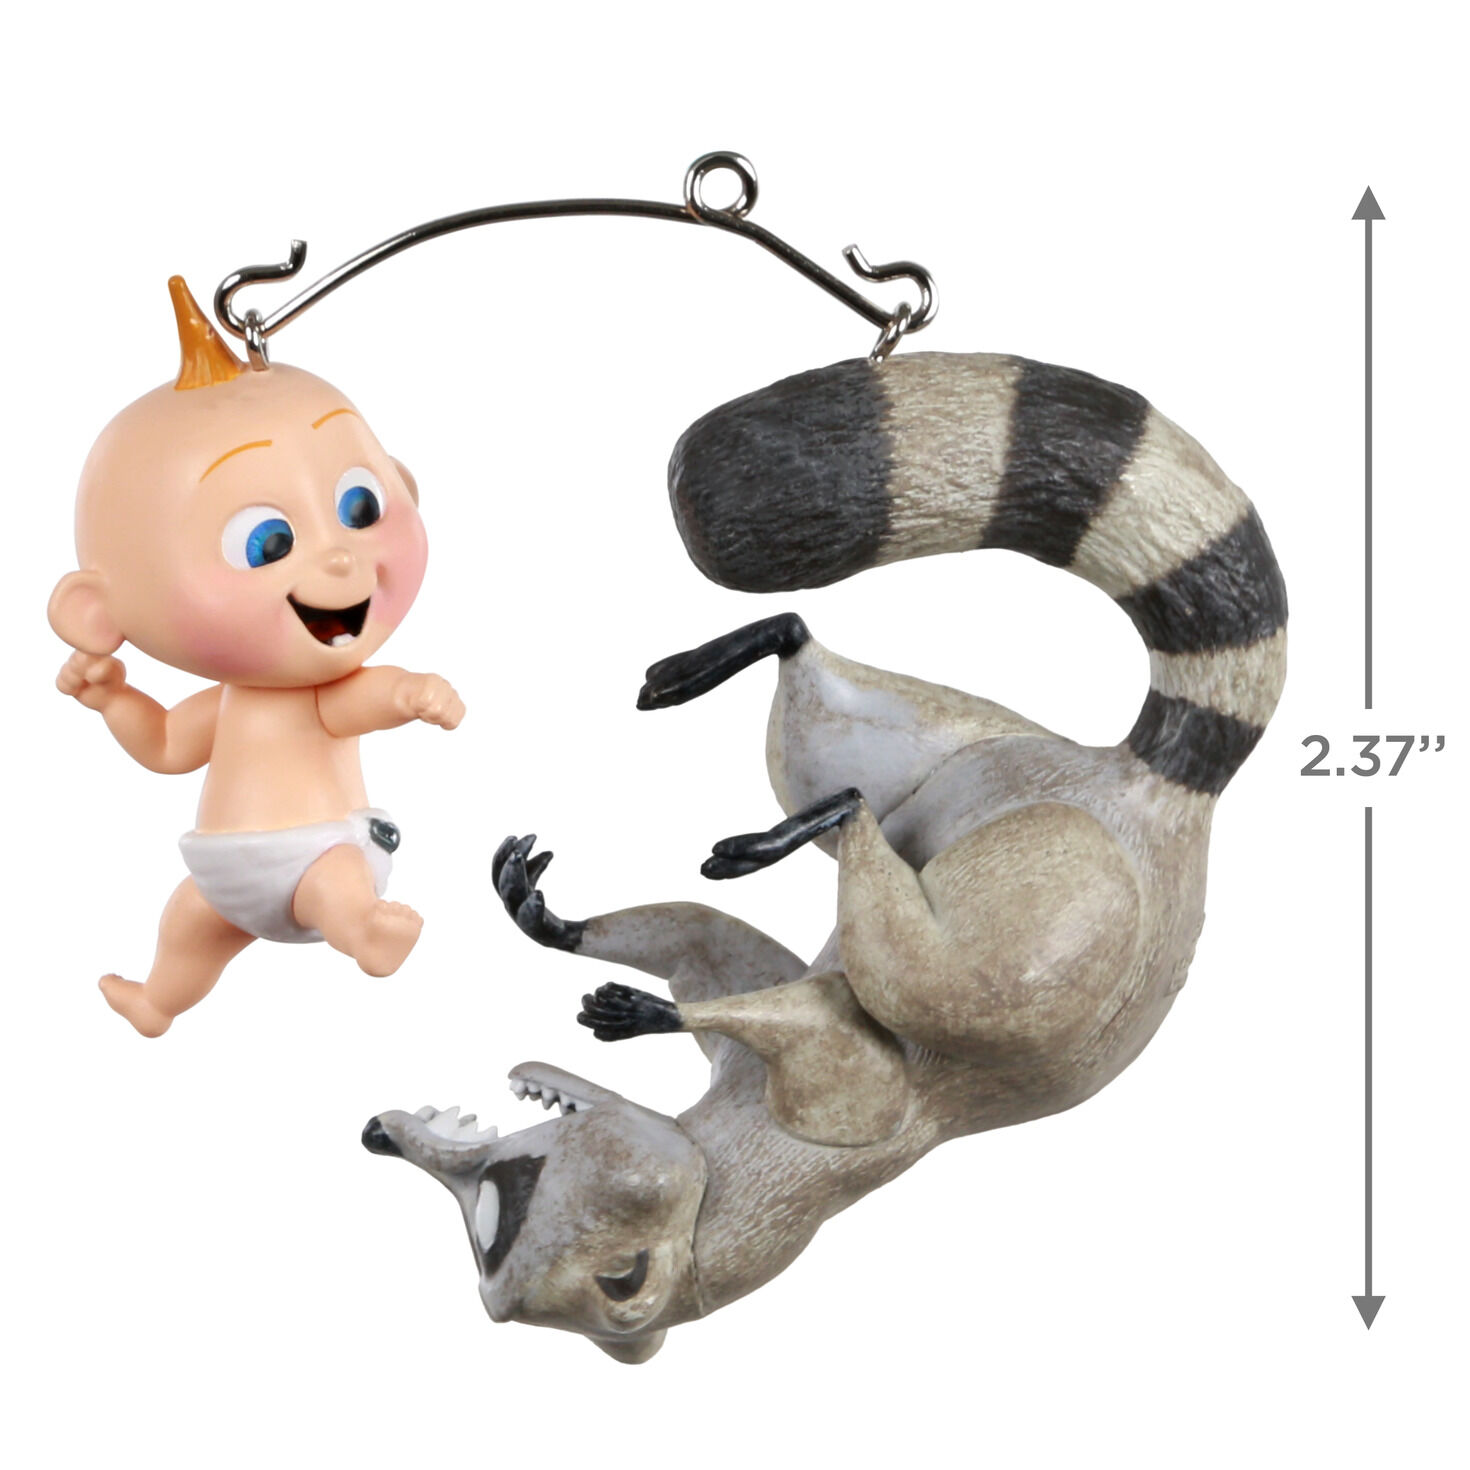 incredibles 2 raccoon toy